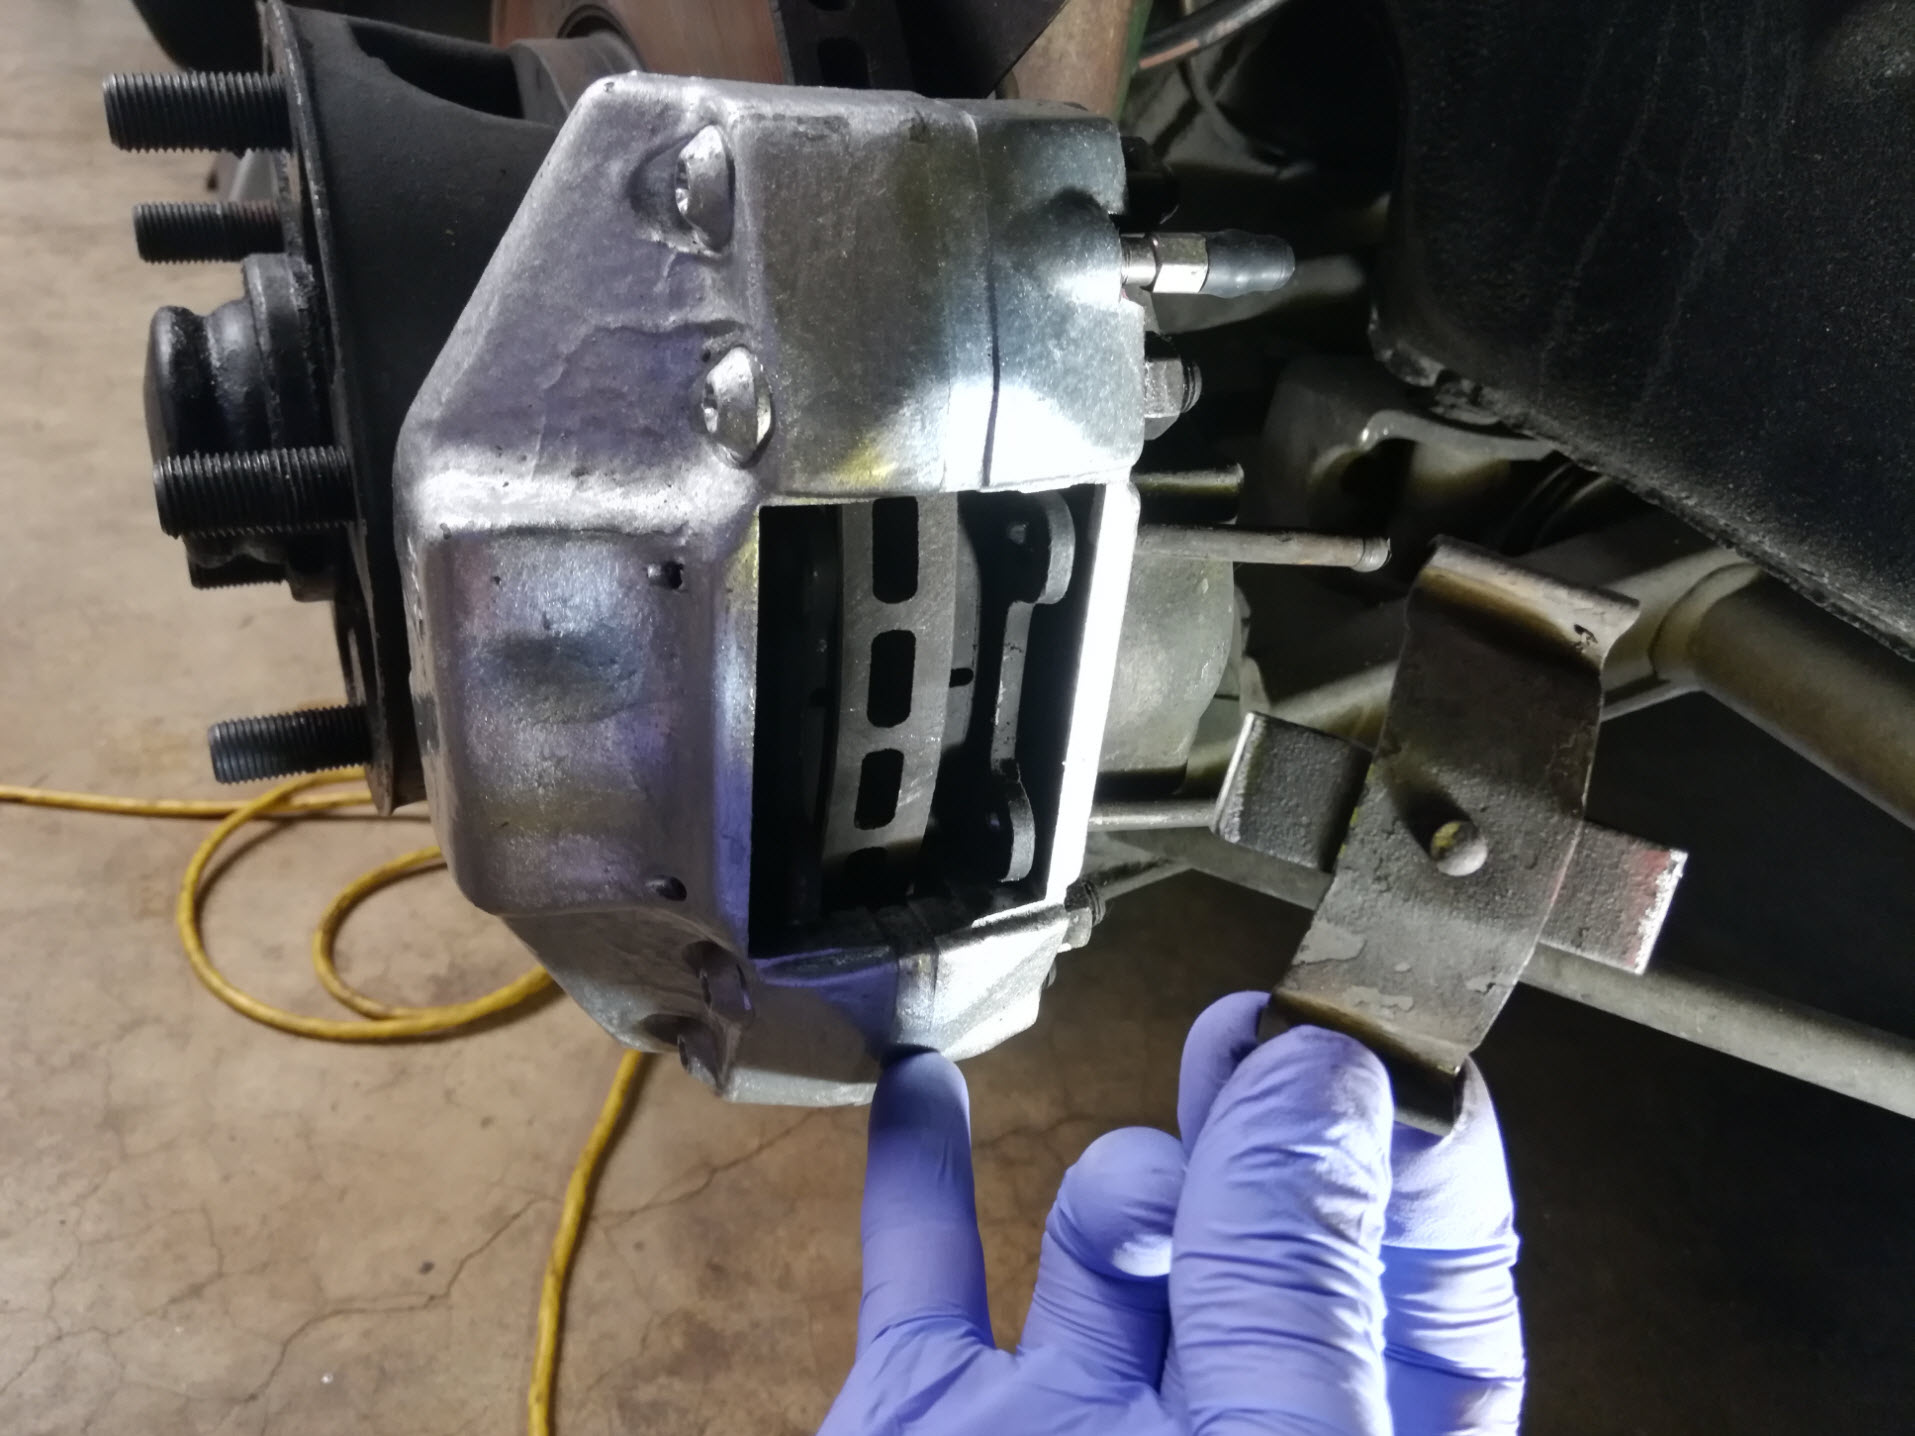 Air-cooled Porsche 911 brake pad retaining spring removal.